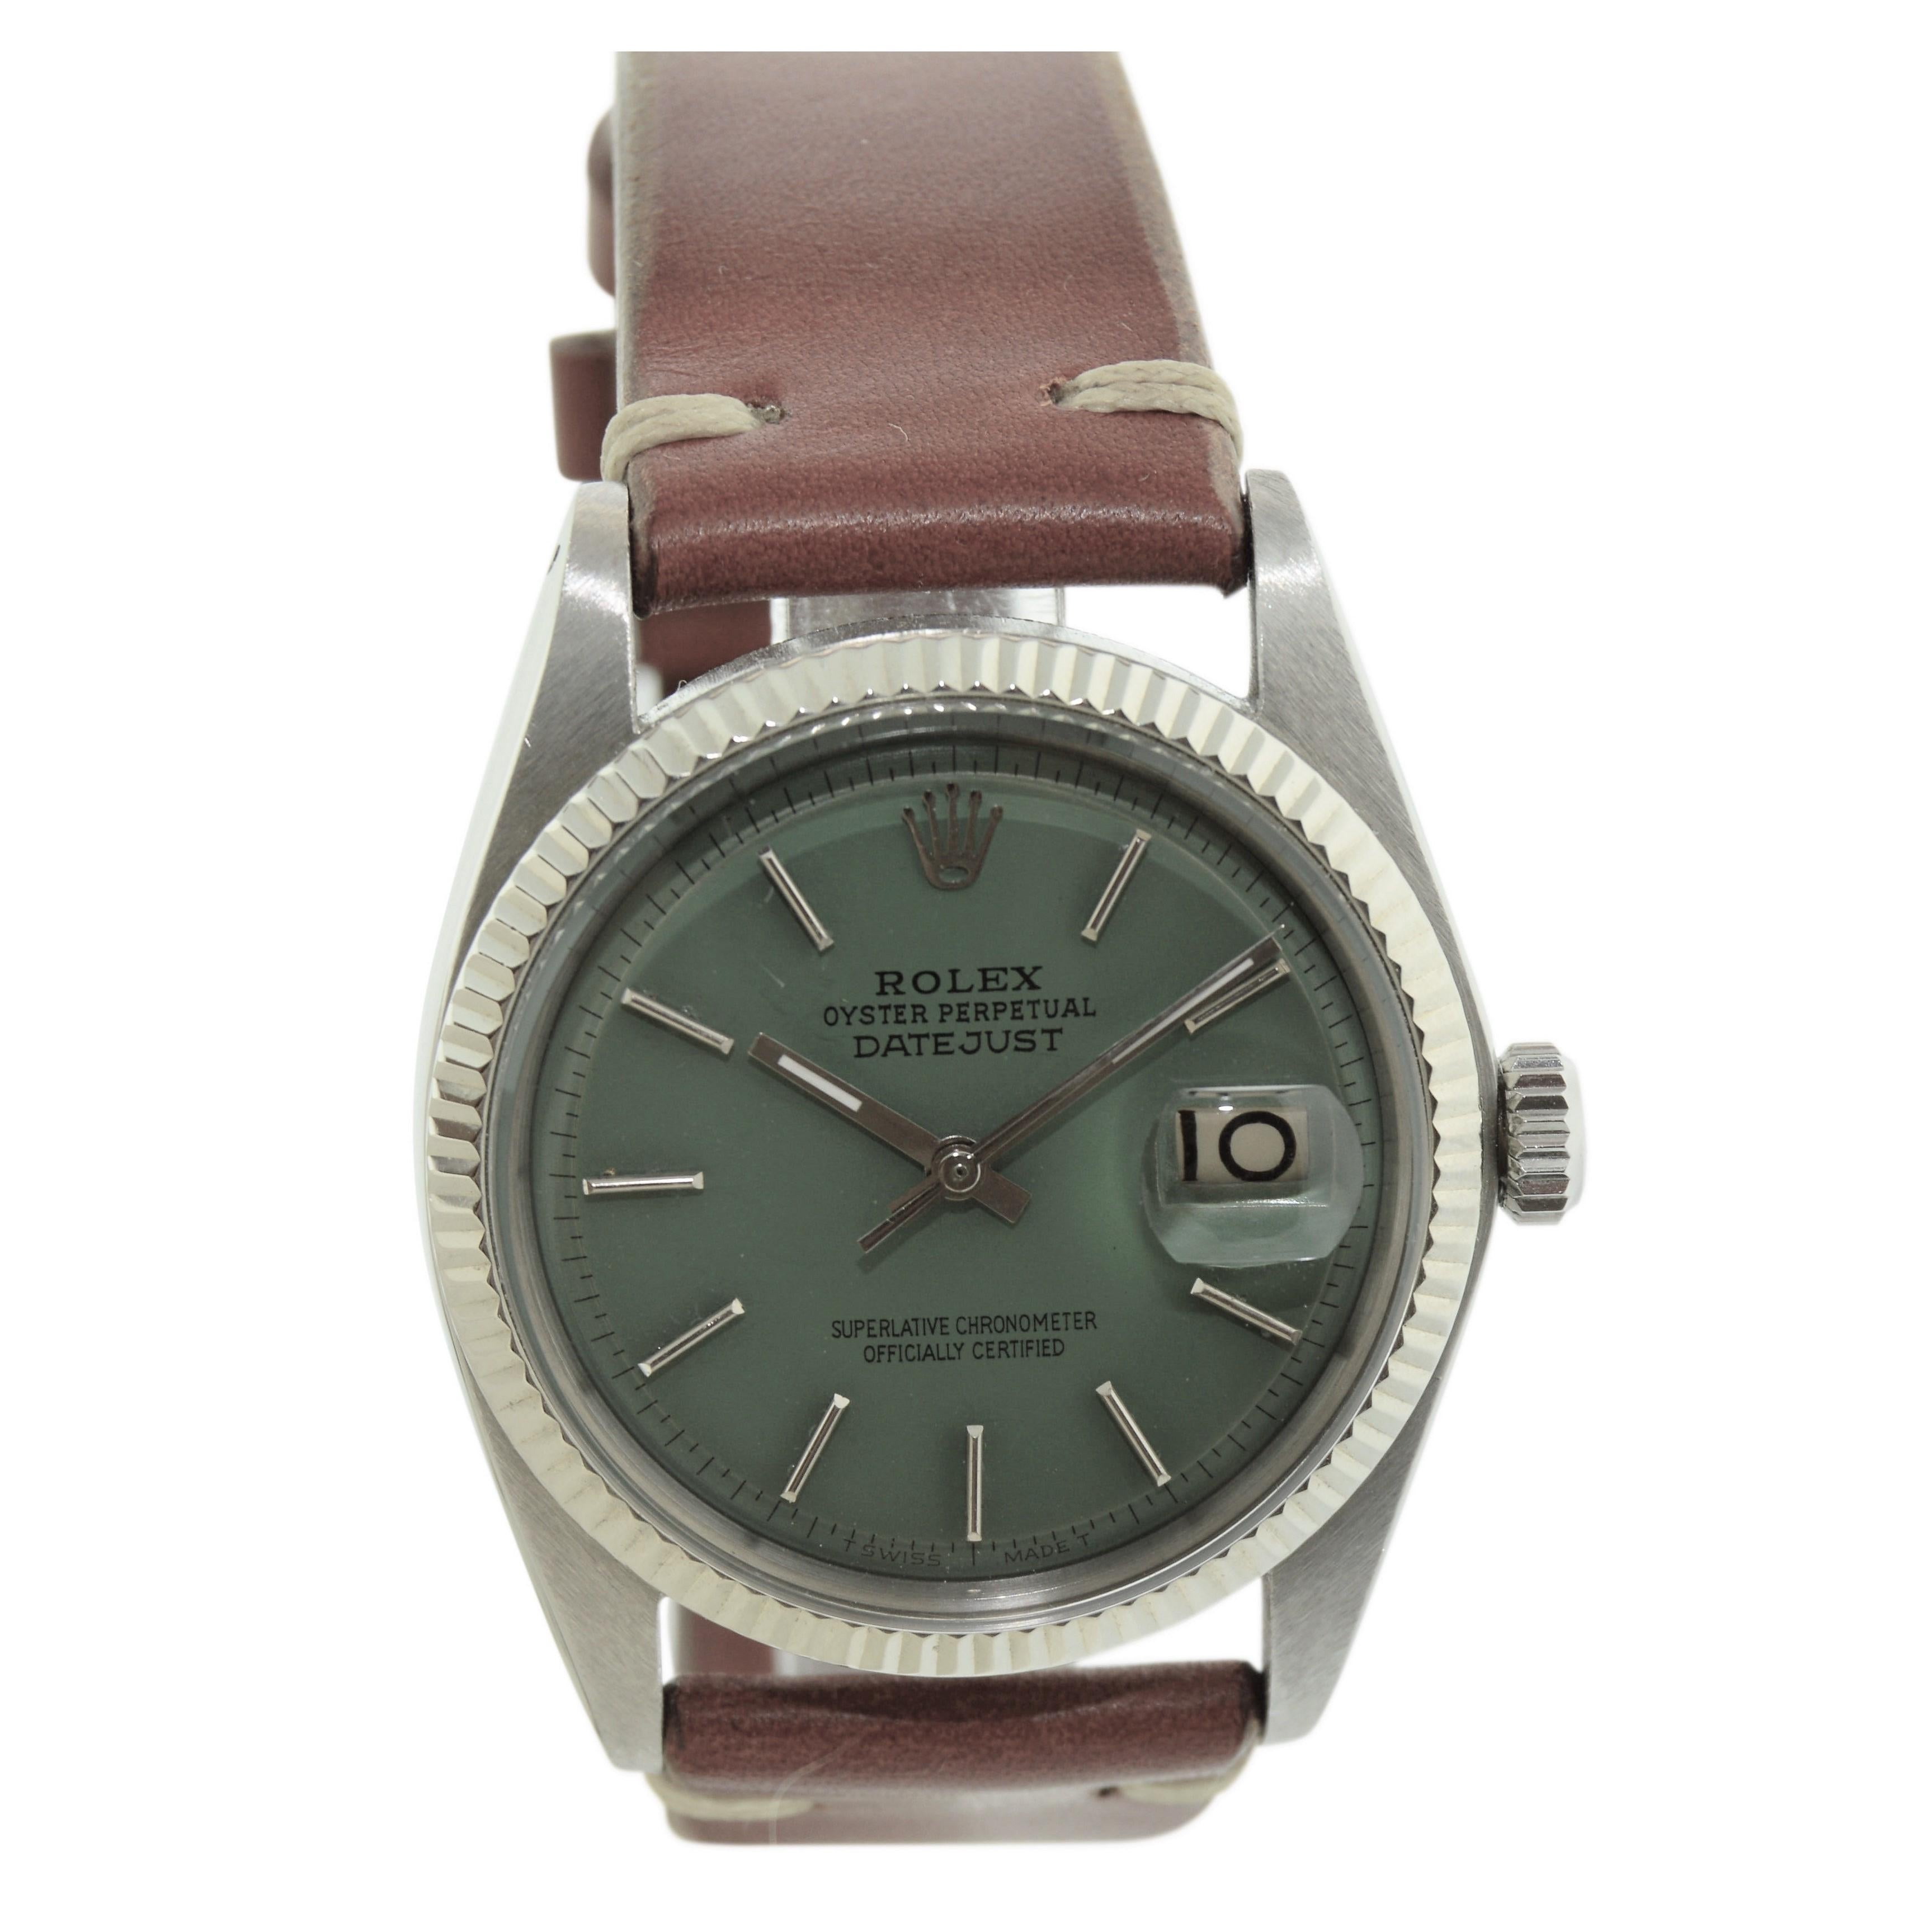 FACTORY / HOUSE: Rolex Watch Company
STYLE / REFERENCE: Datejust / Reference 1601
METAL / MATERIAL: Stainless Steel w/ White Gold Bezel
DIMENSIONS:  42mm  X  36mm
CIRCA: 1960's
MOVEMENT / CALIBER: Perpetual Winding / 26 Jewels / Cal. 1570
DIAL /